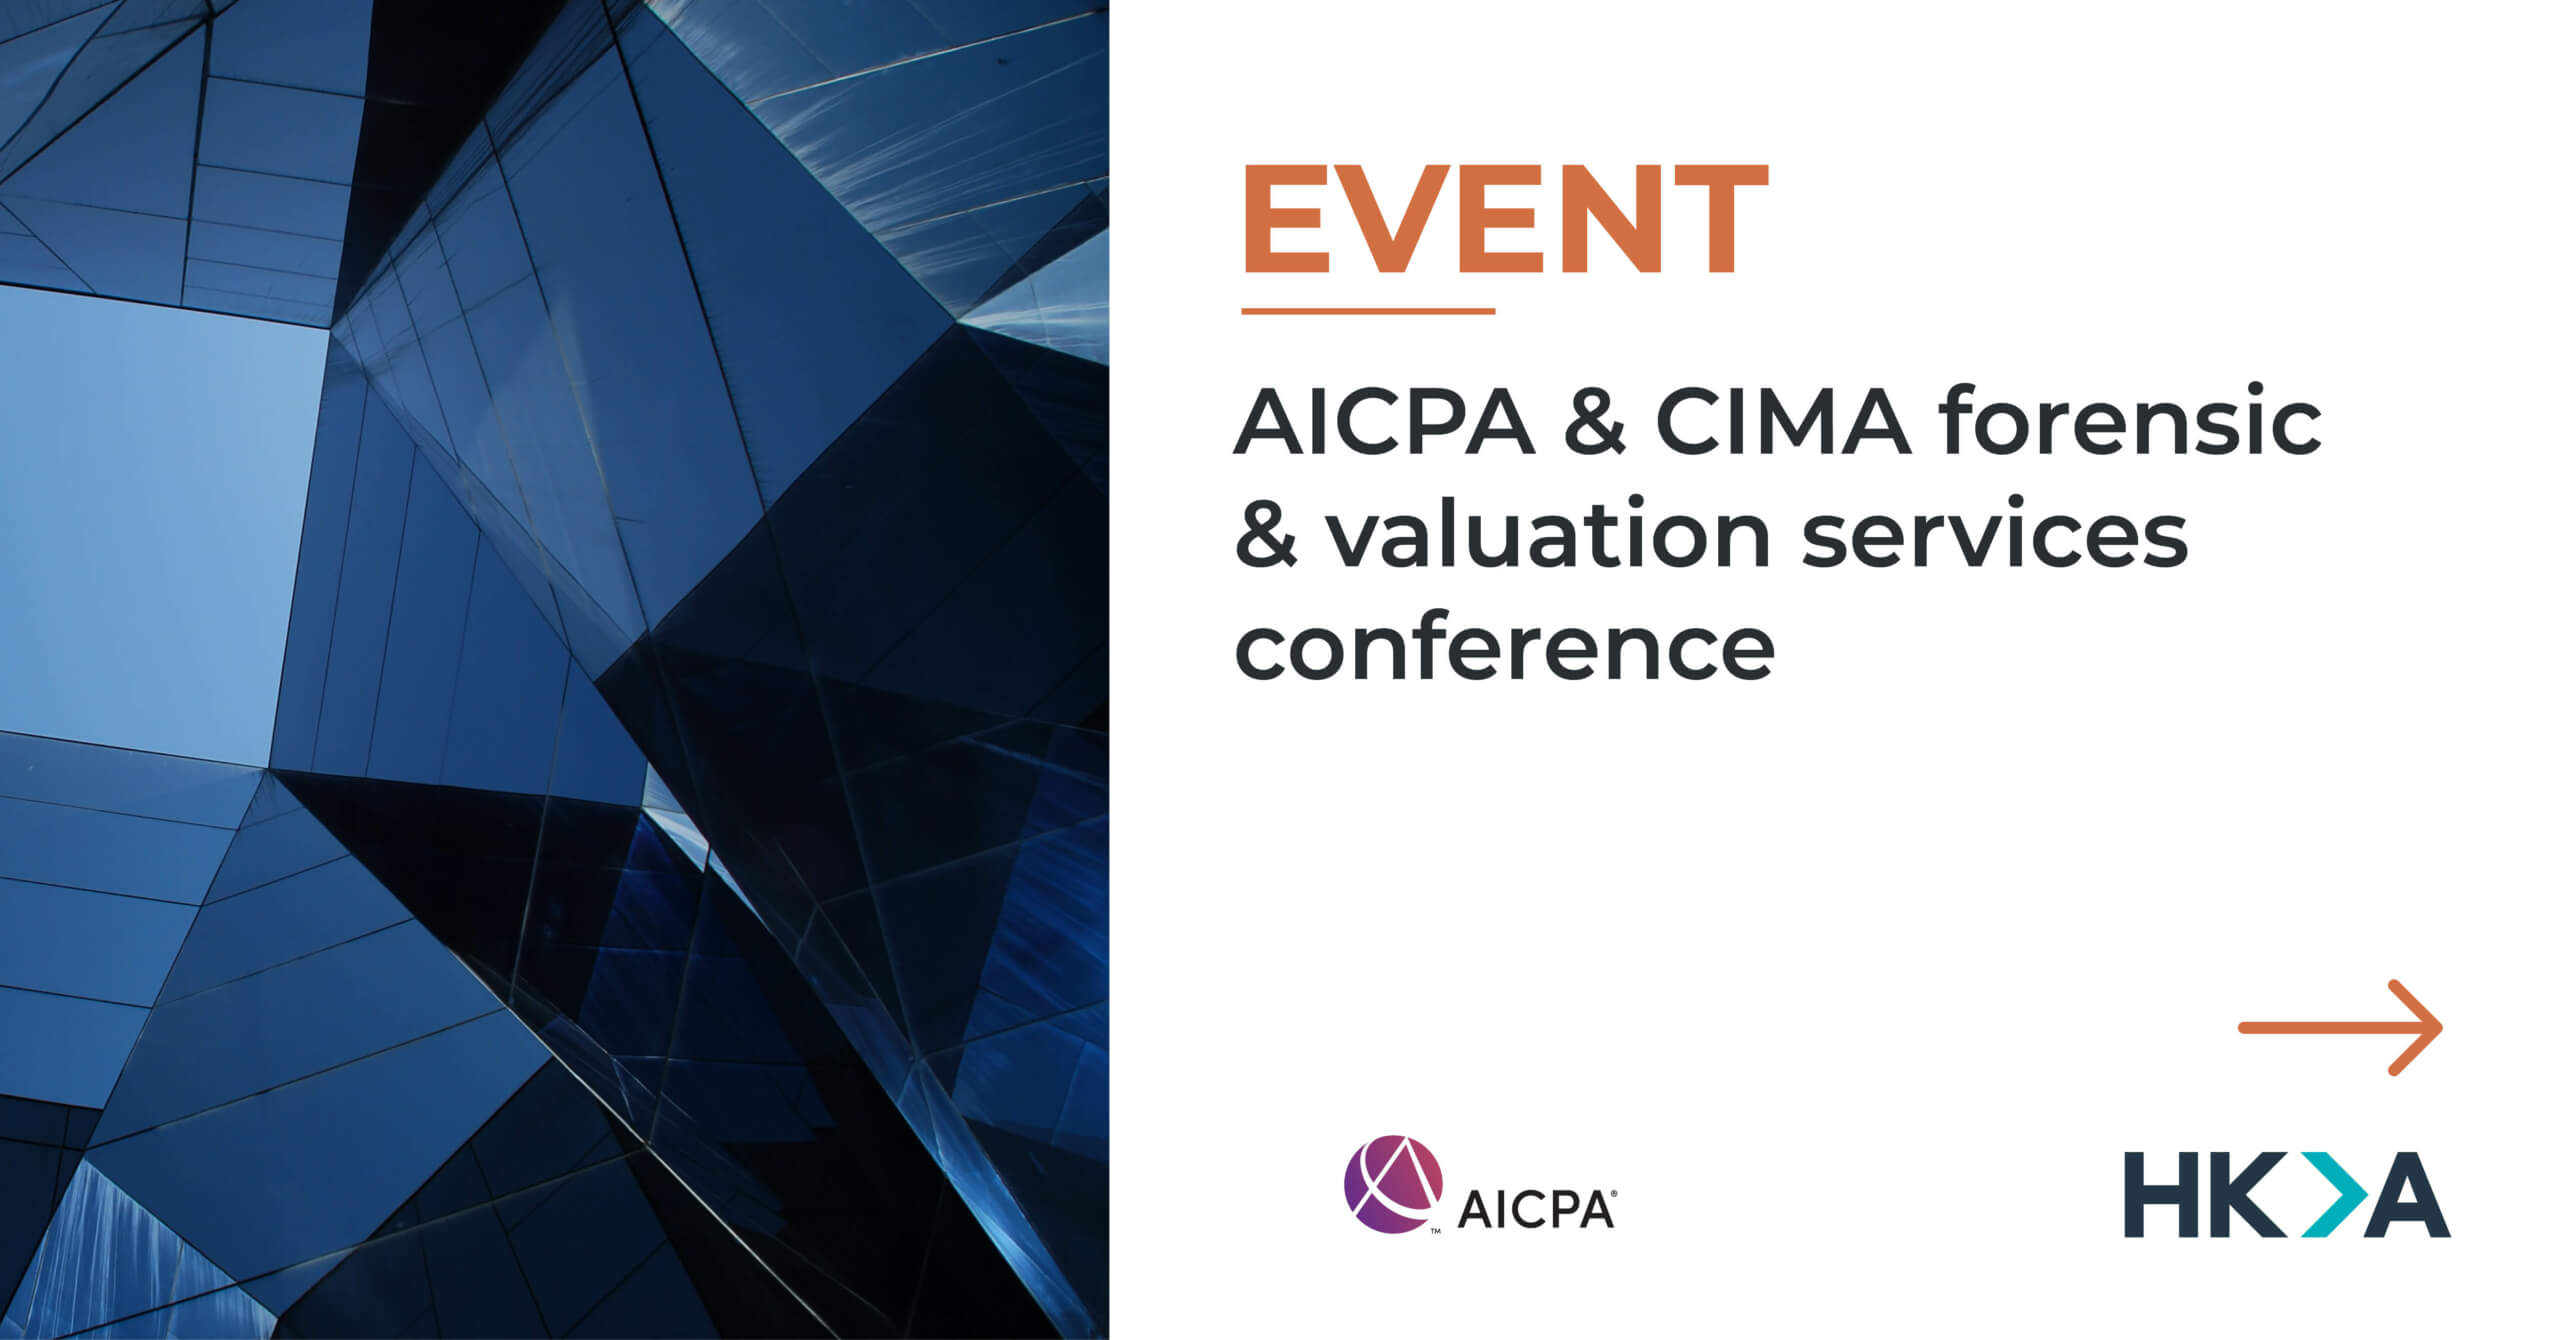 AICPA & CIMA Forensic & Valuation Services Conference HKA